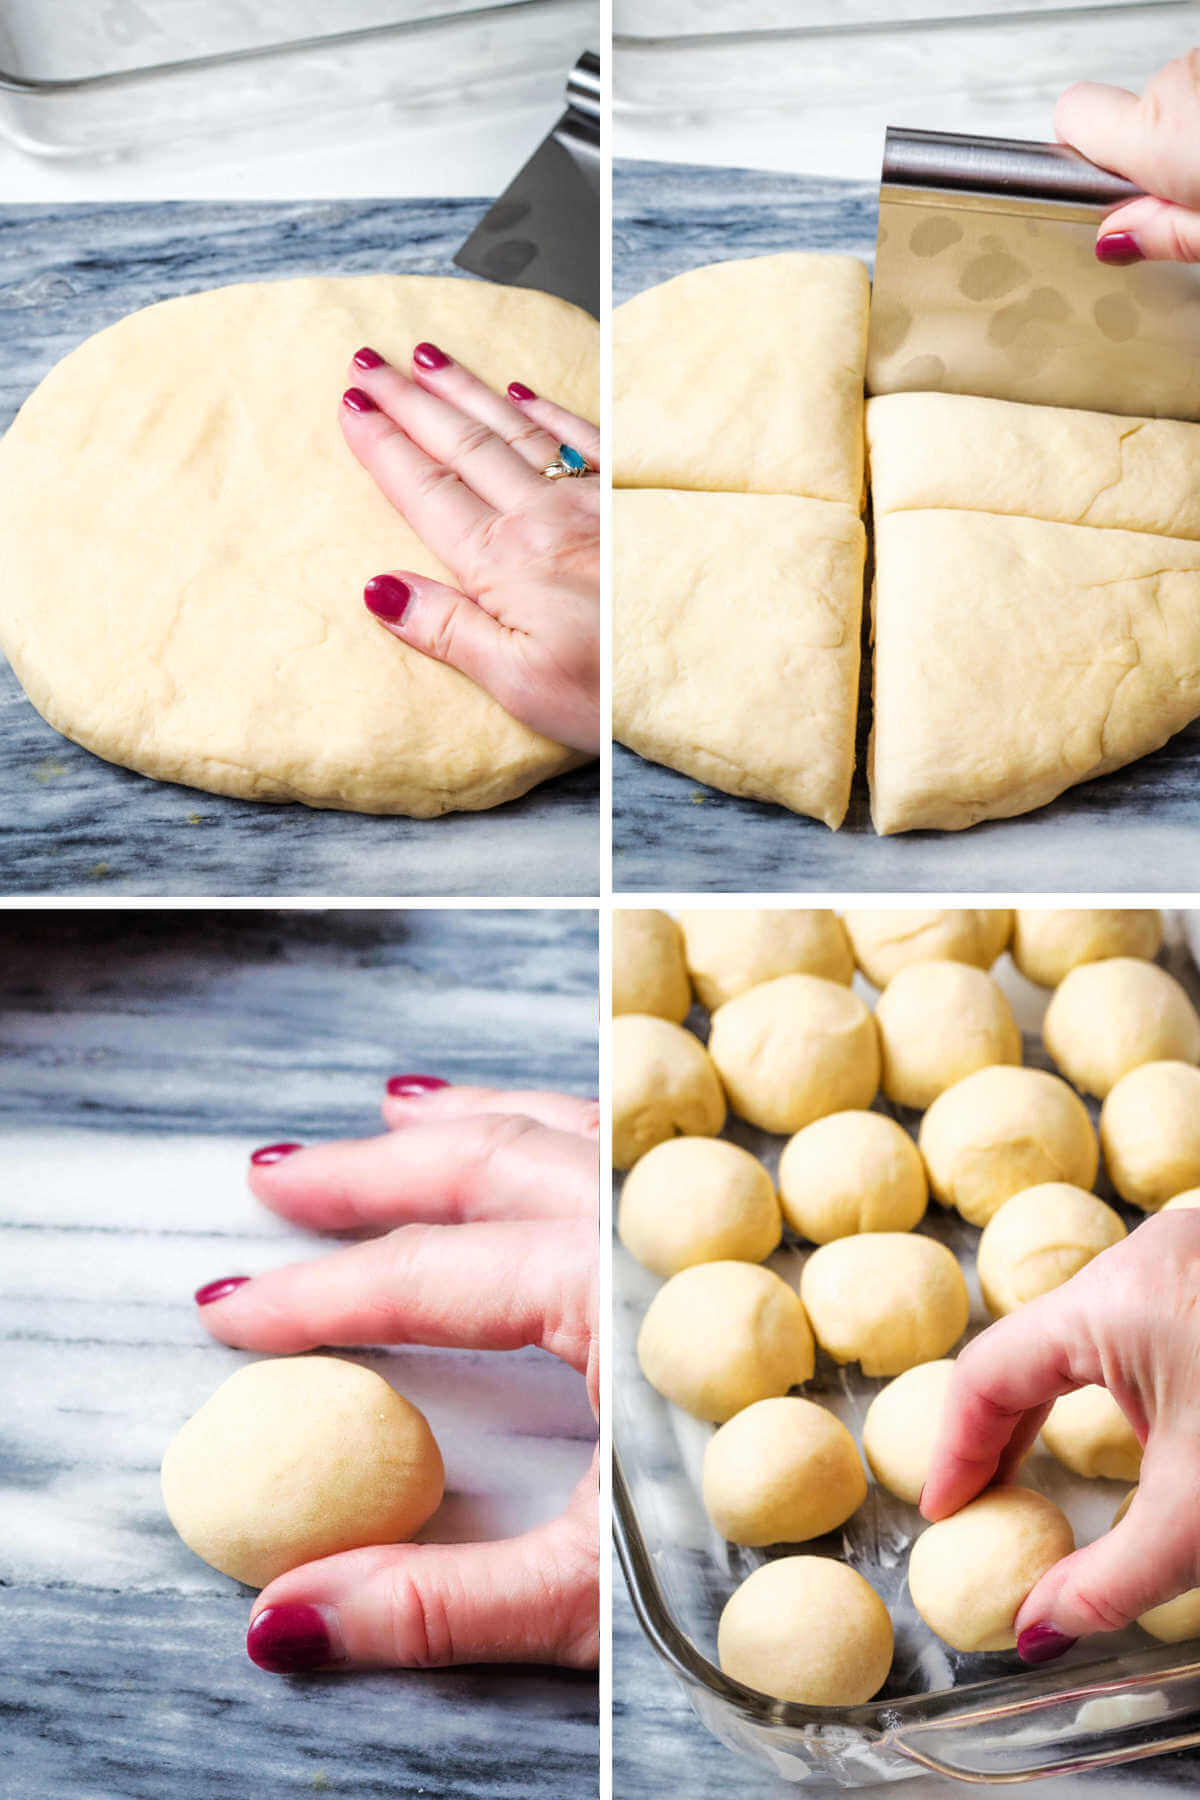 patting dough and rolling into balls for dinner rolls.